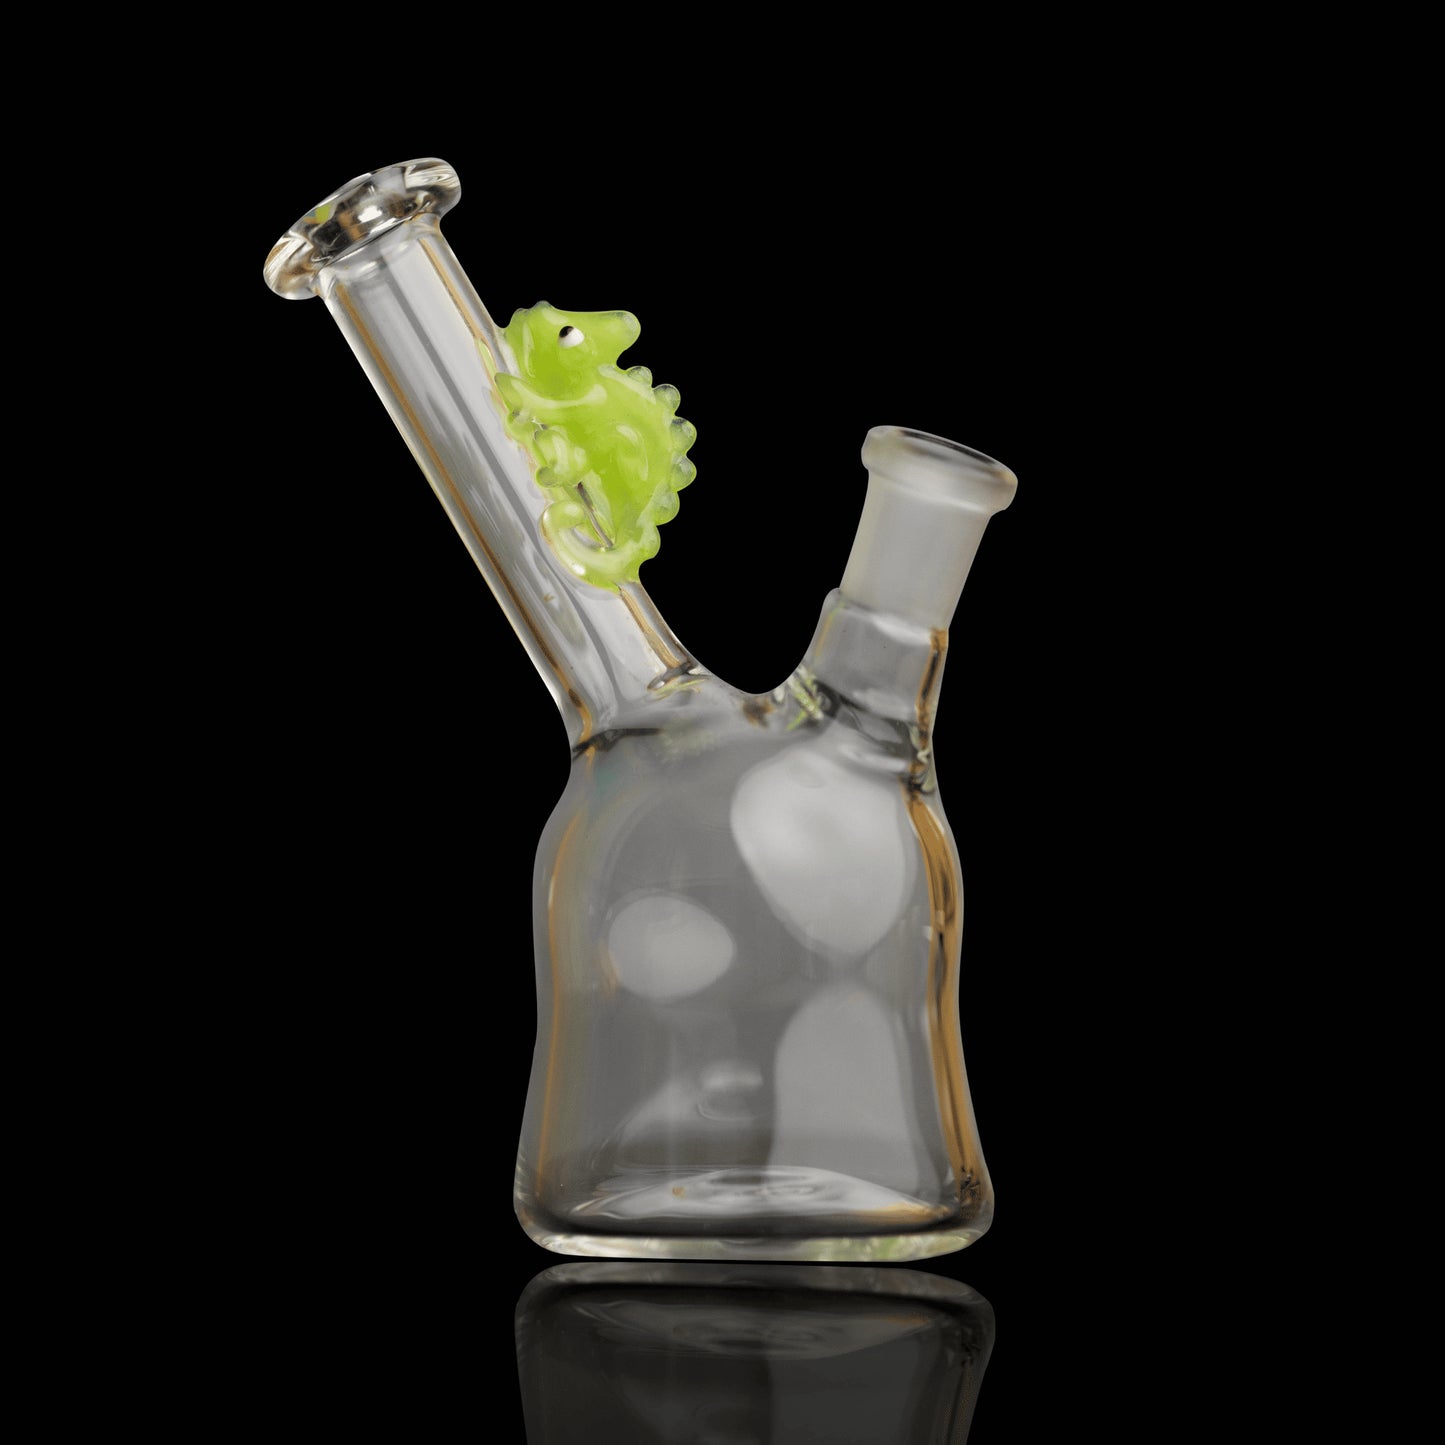 sophisticated design of the Clear Rig w/ Green Chameleon (G) by Willy That Glass Guy